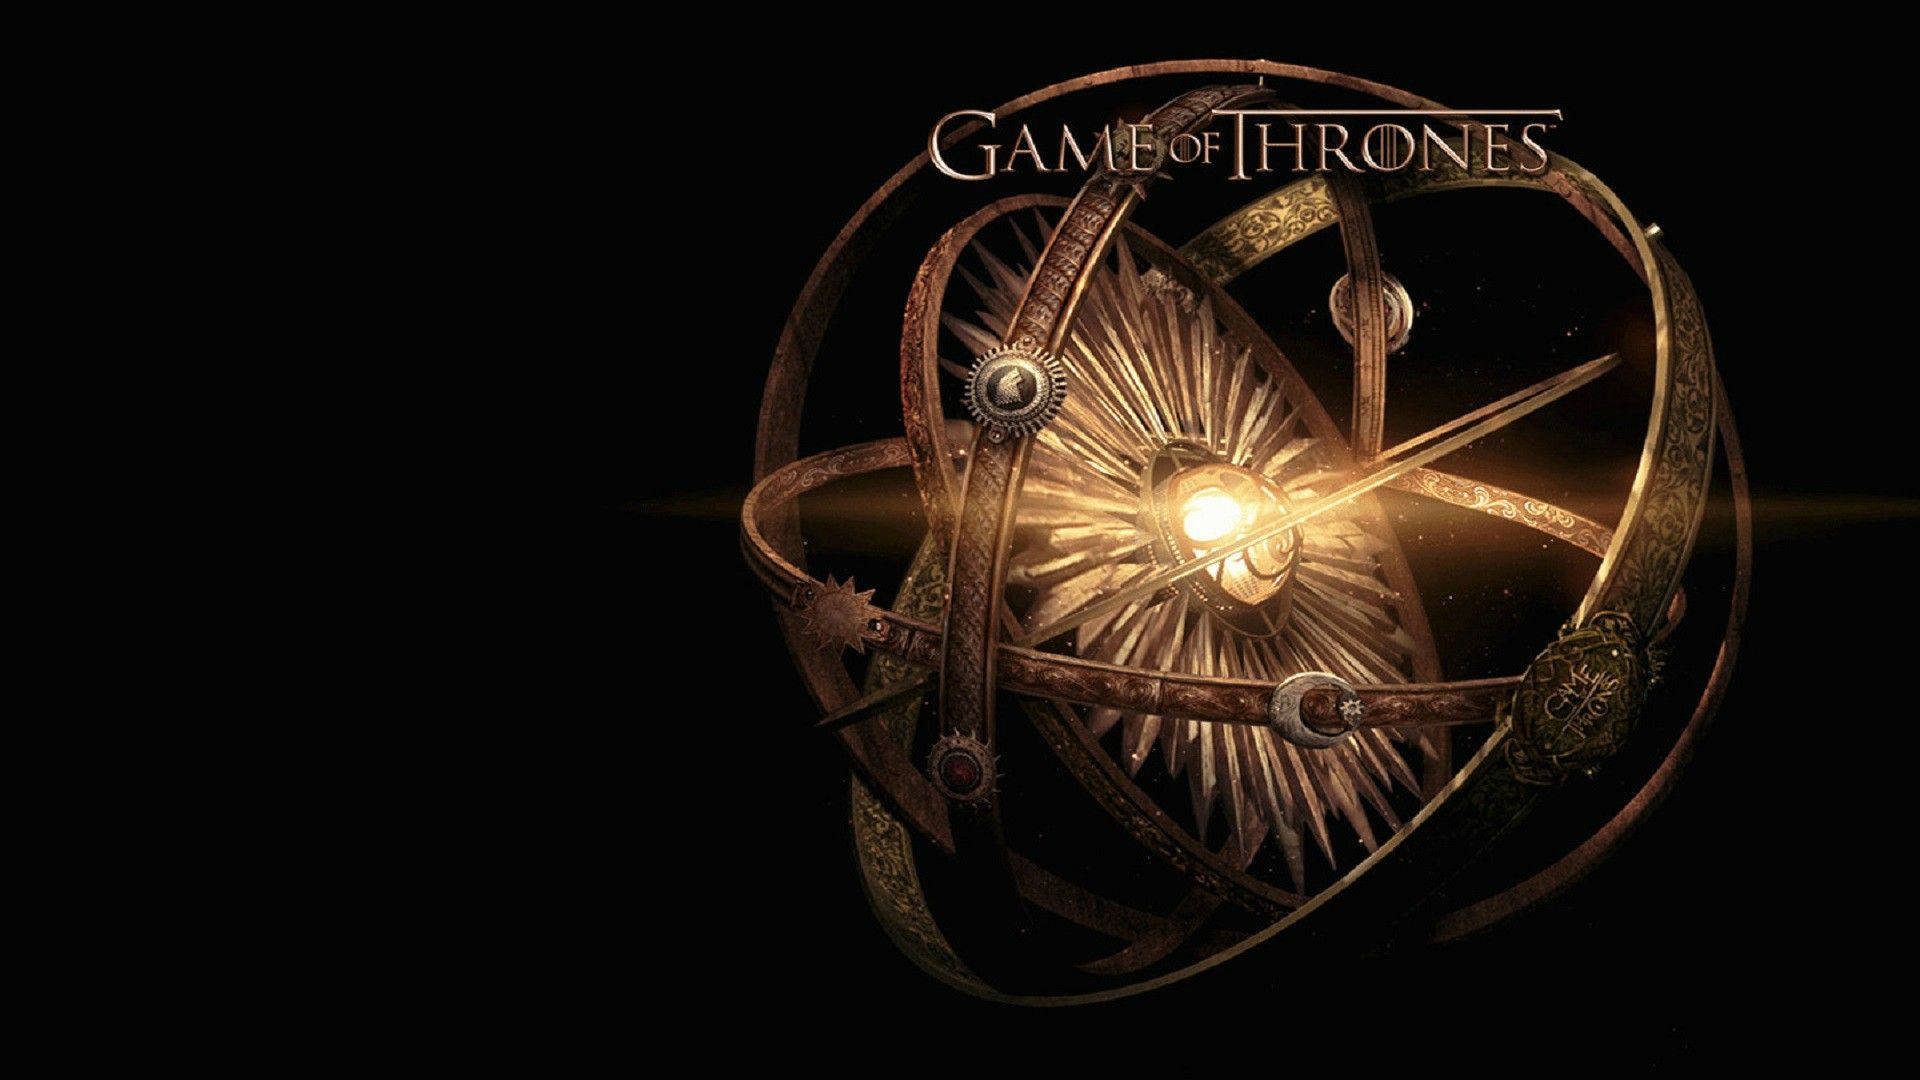 Cool Astrolabe Of Game Of Thrones